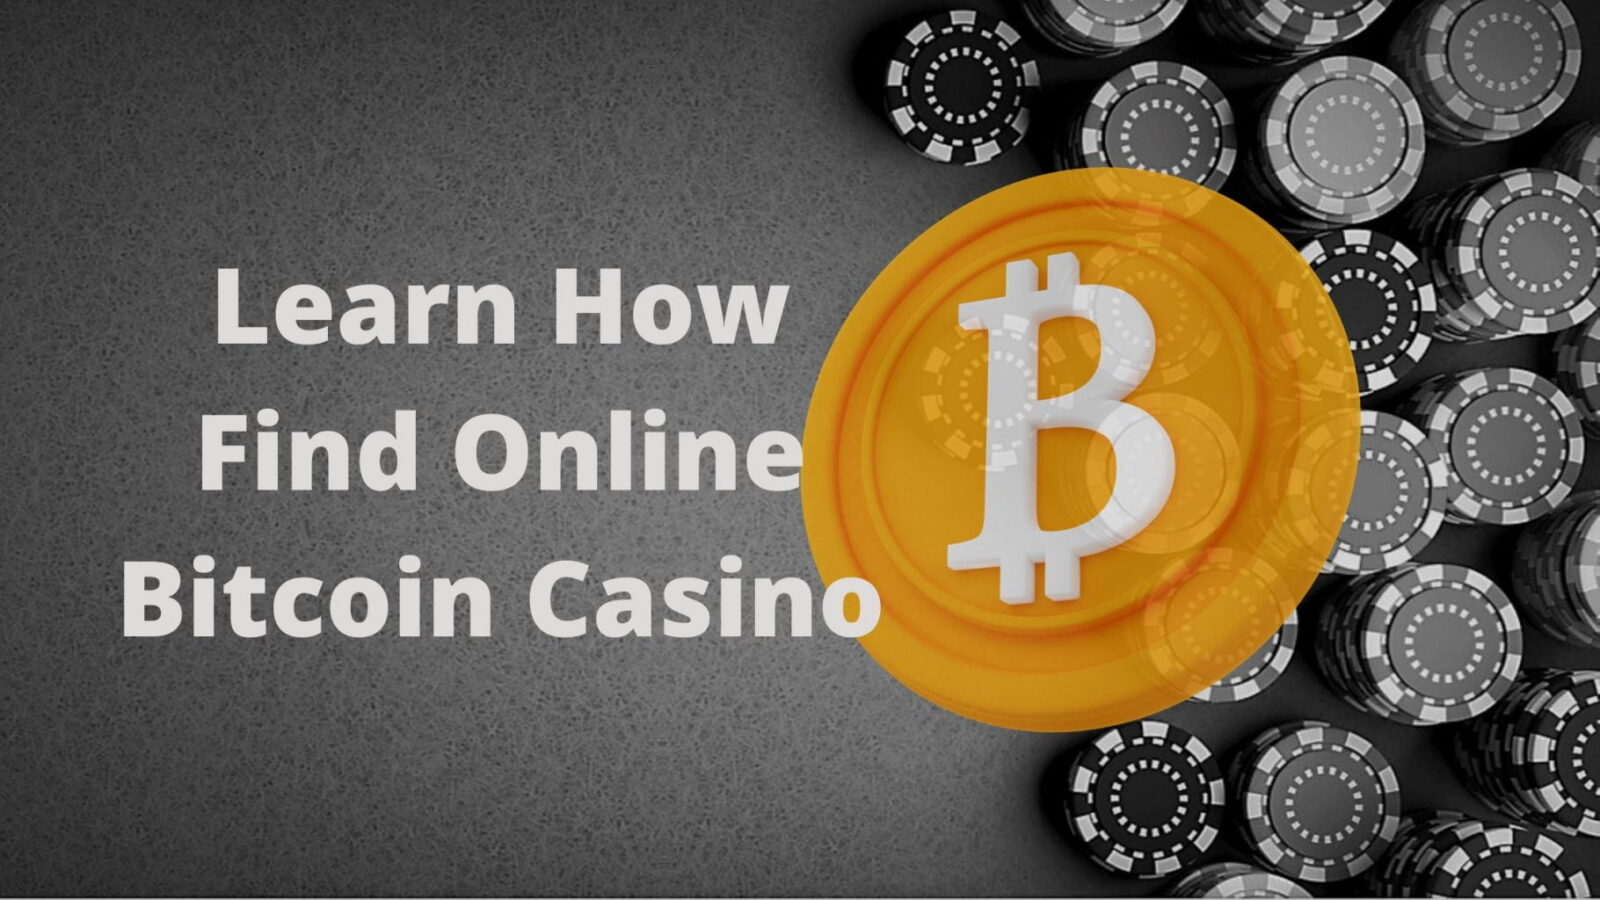 bitcoin casino sites And Other Products